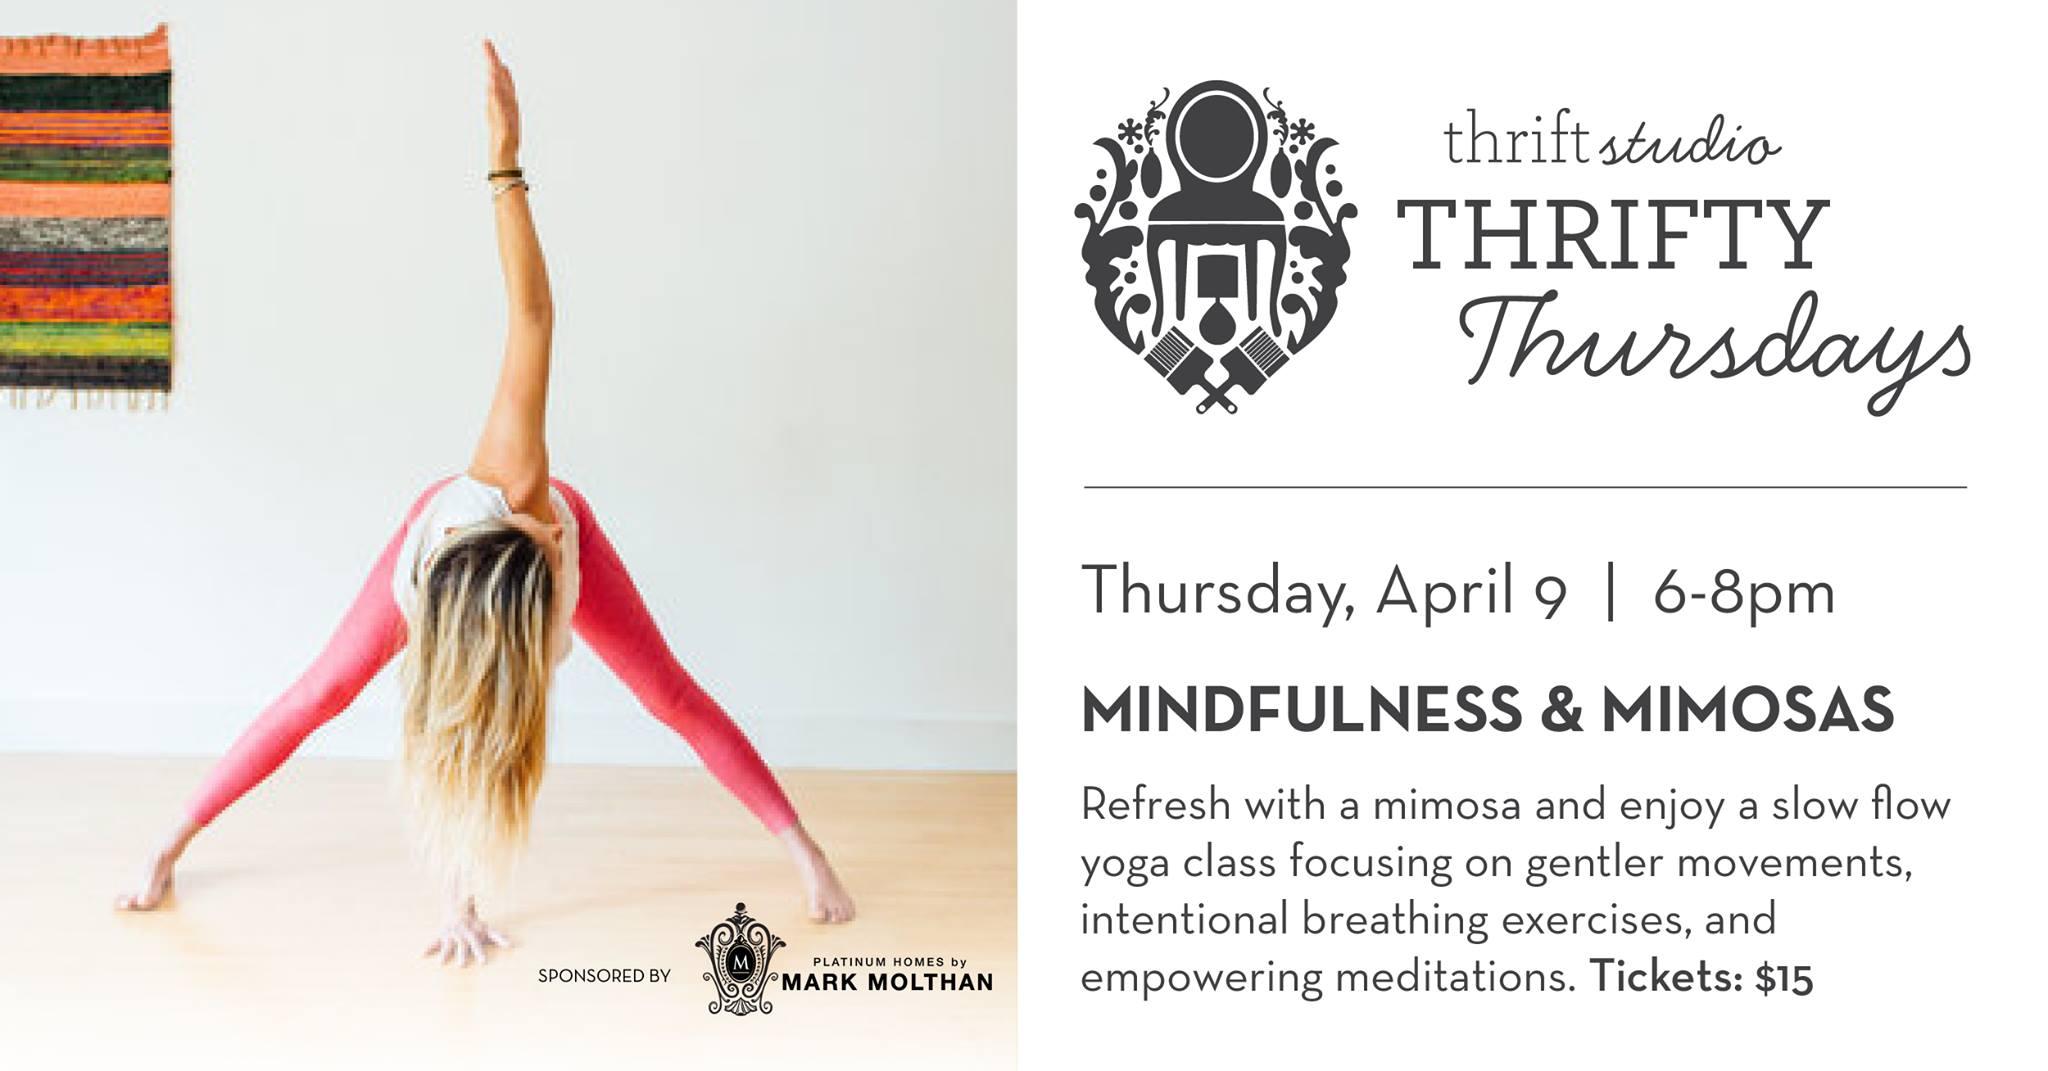 Thrifty Thursday at Thrift Studio: Mindfulness and Mimosas